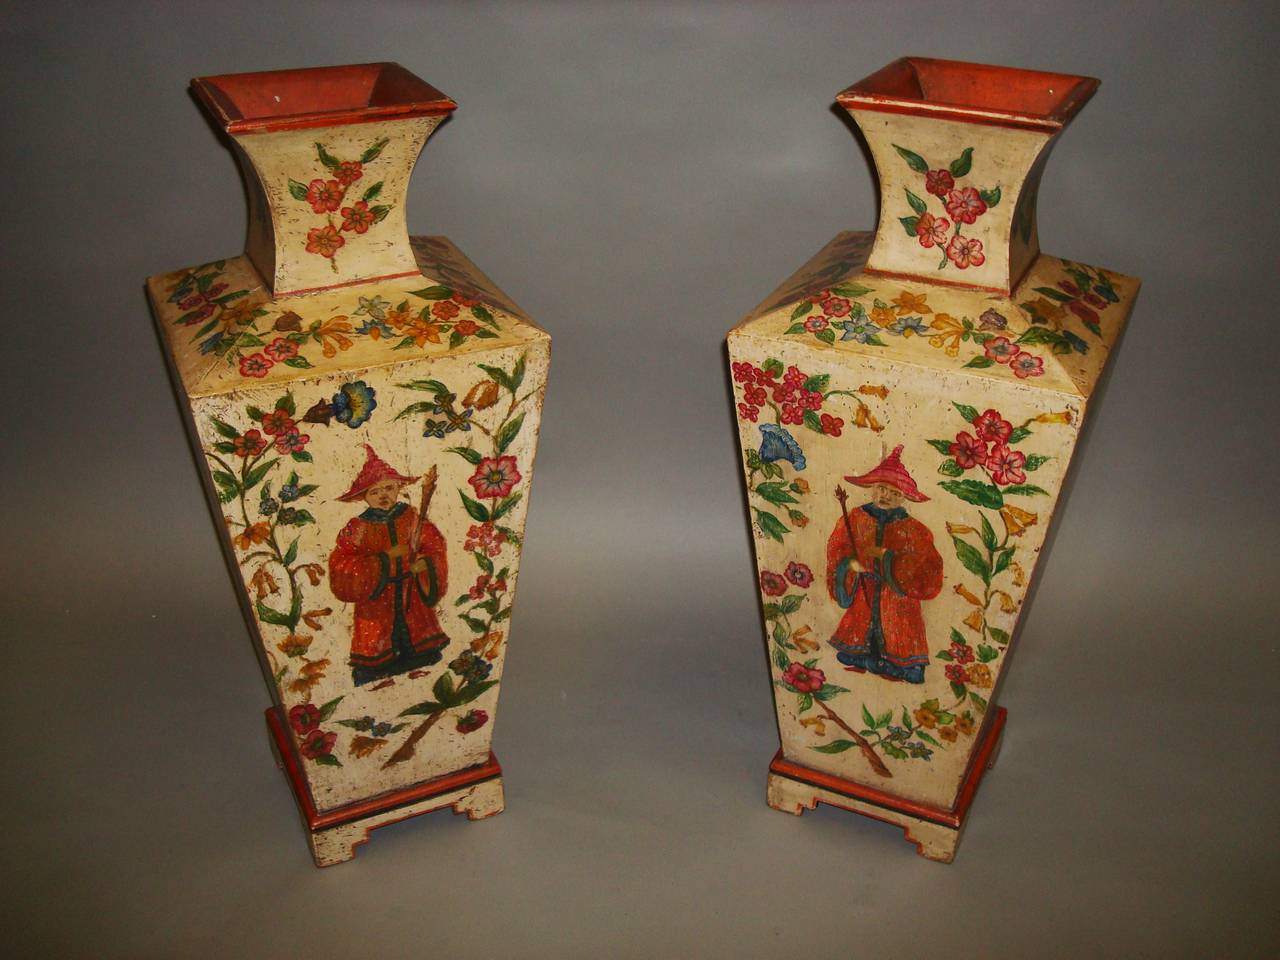 Early 20th century Decorative Pair of Large Painted Pine Vases For Sale 4